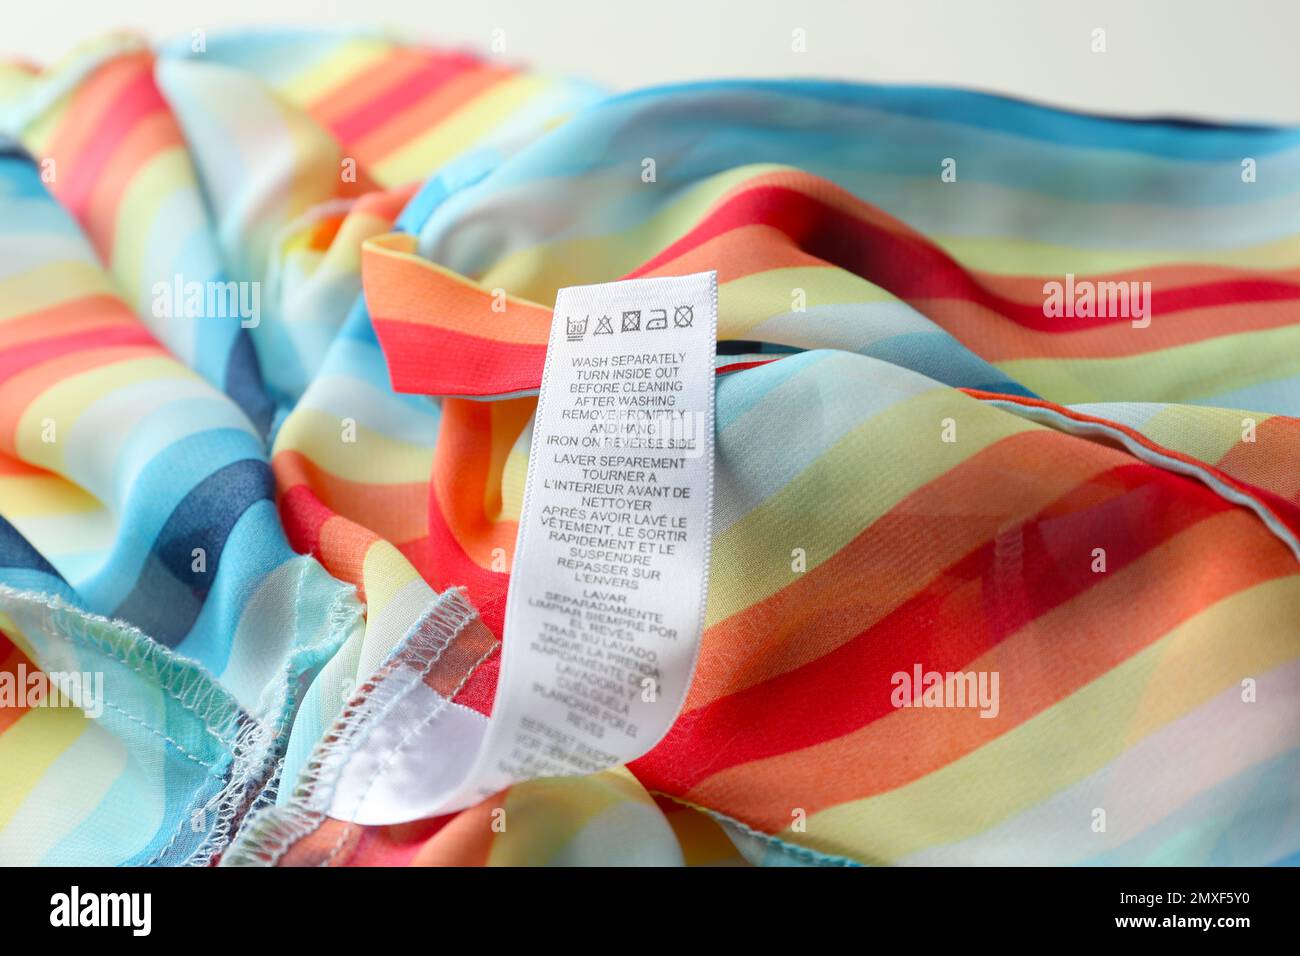 Clothing label with care instructions on colorful striped garment, closeup Stock Photo